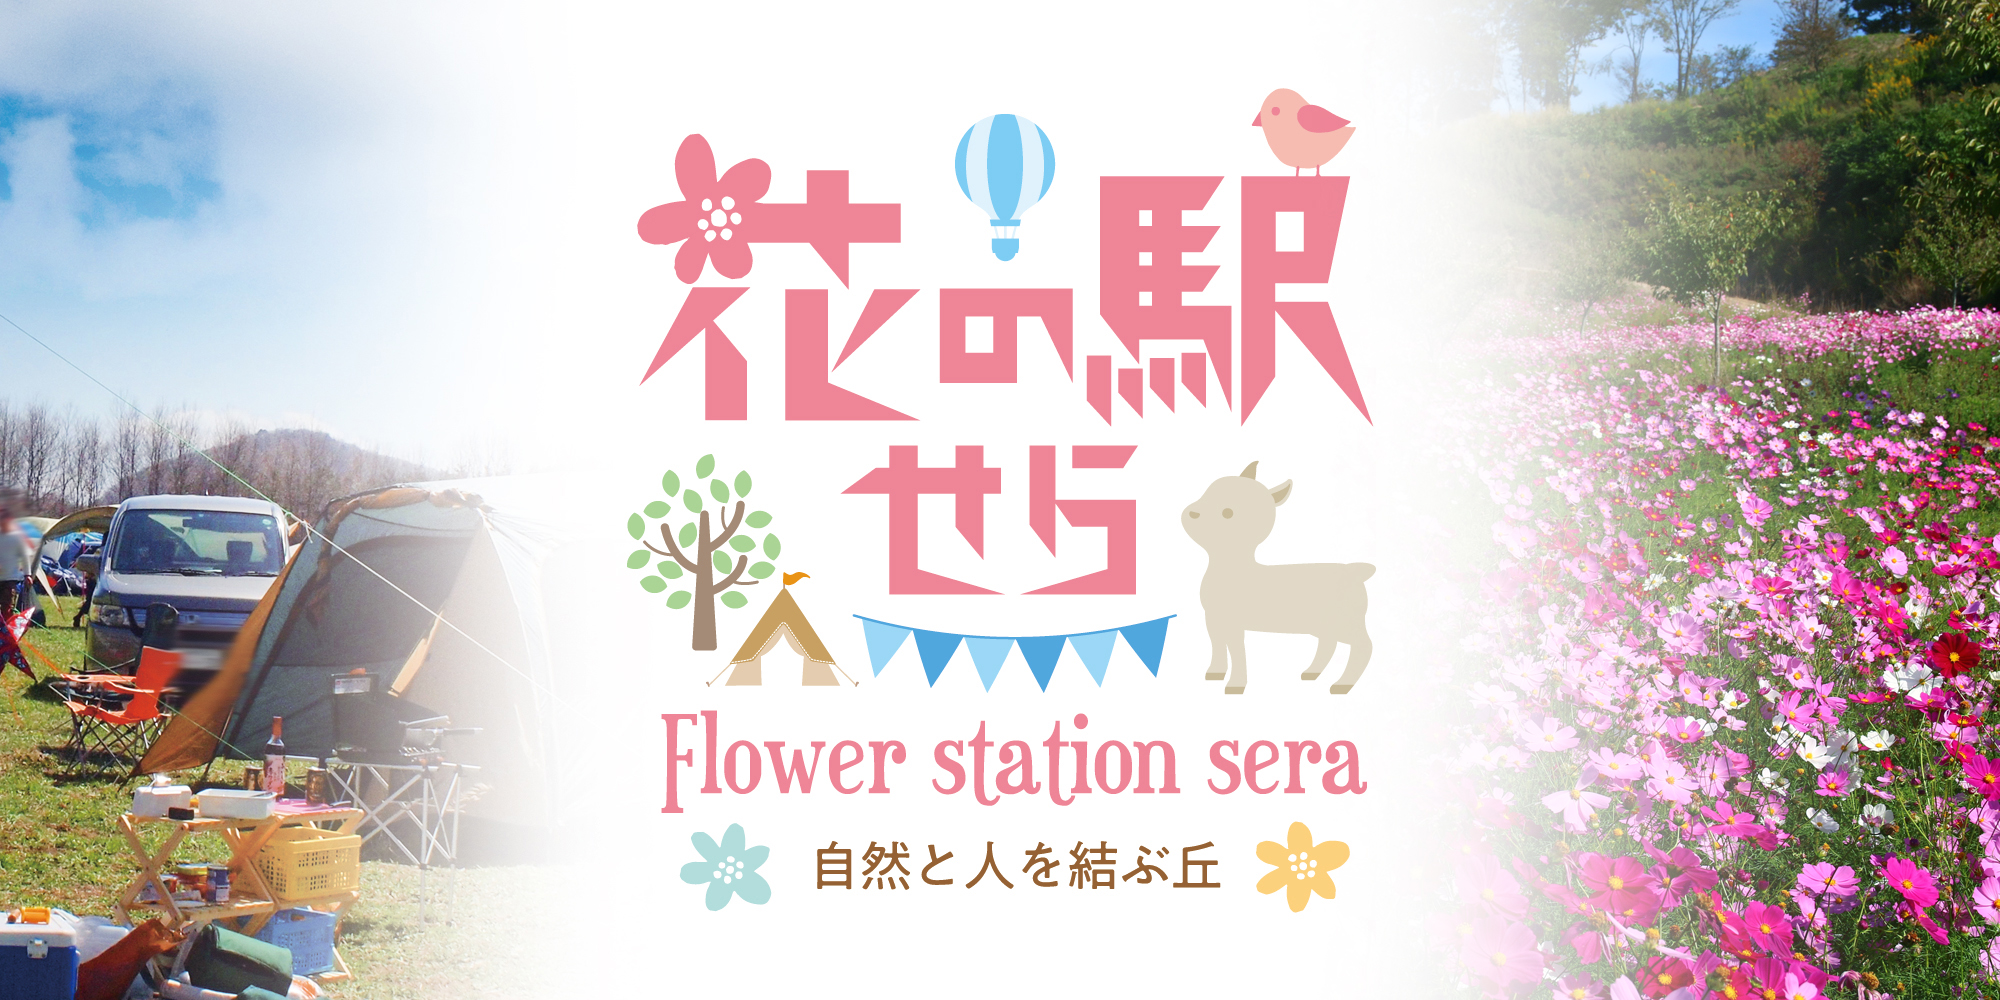 [Flower station sera] A hill that connects nature and people